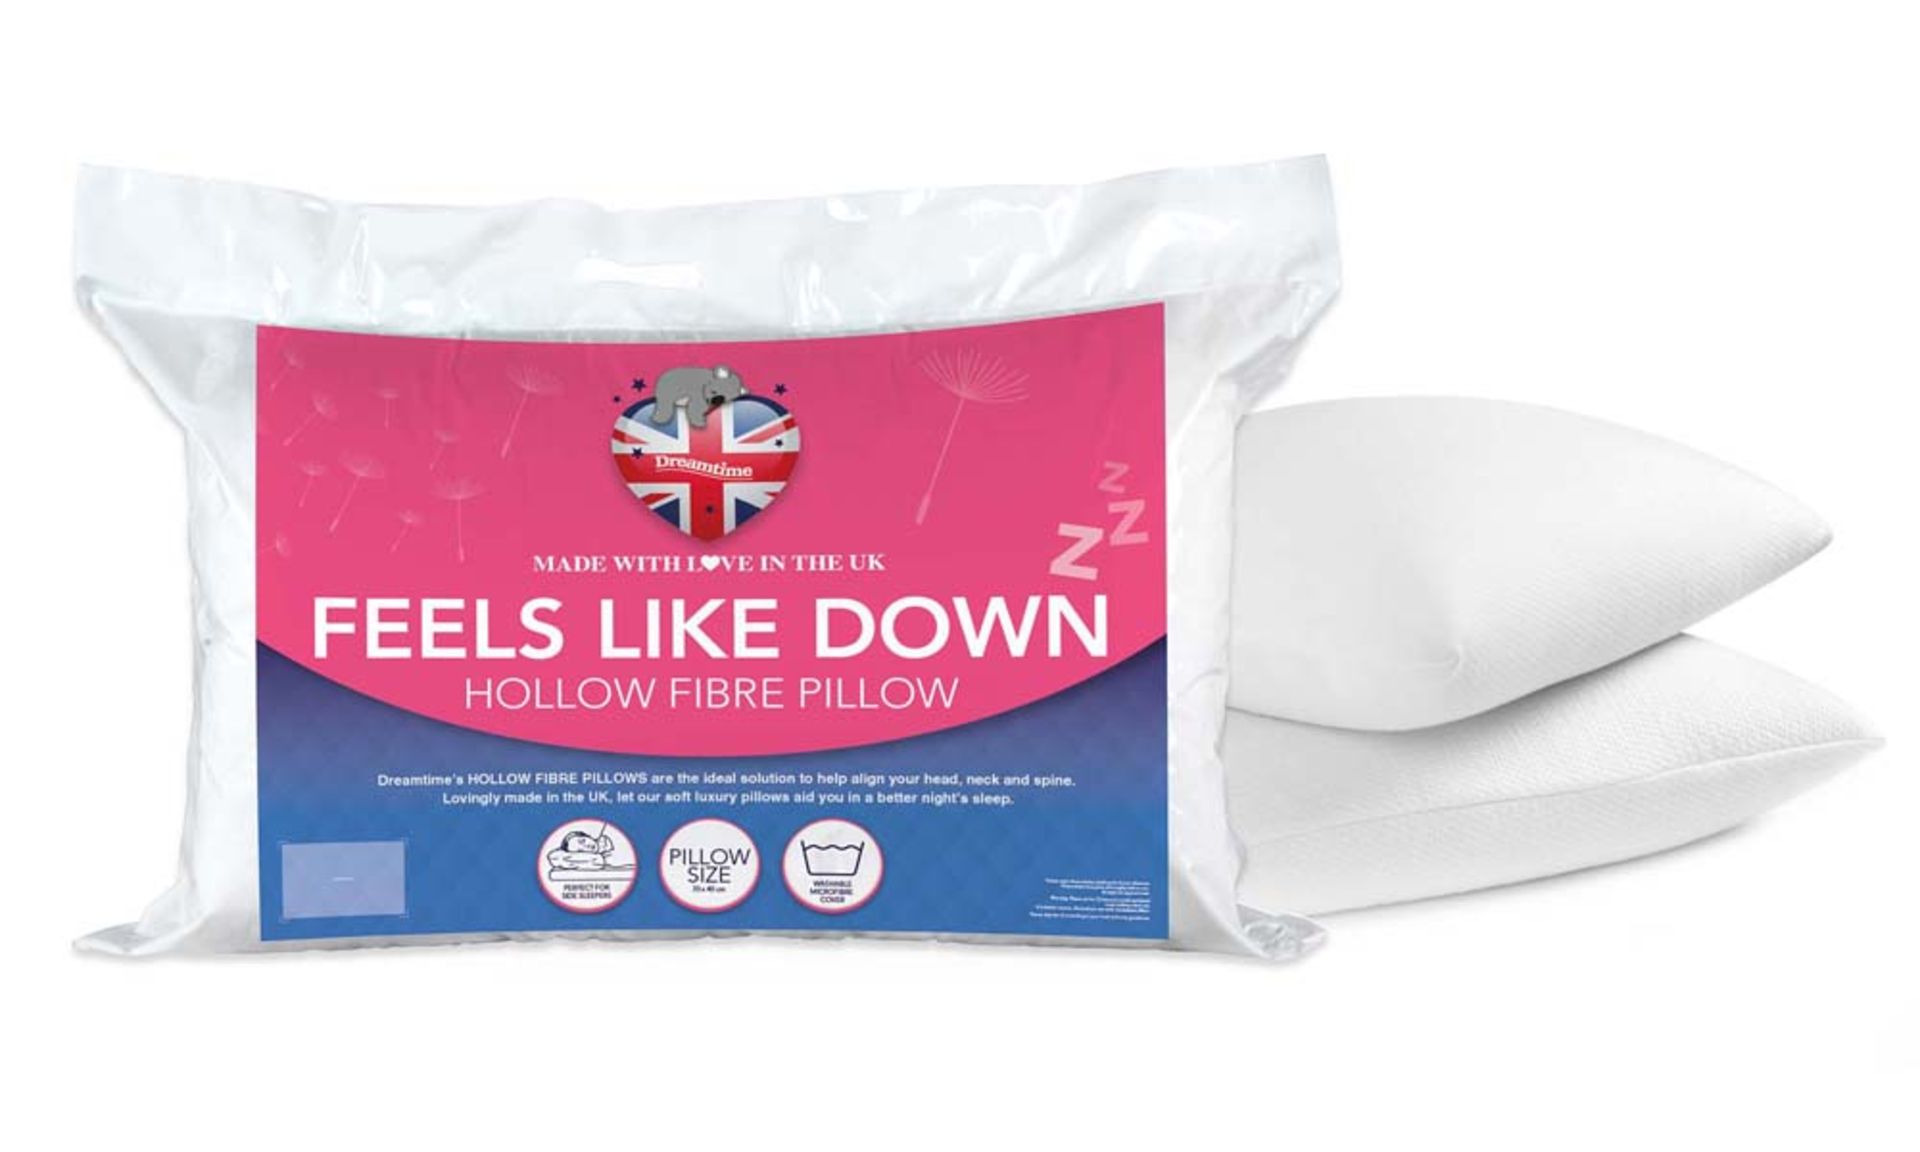 V Brand New Twin Pack Luxury Pillows With Down-Like Filling & Super-Soft Cover. Machine Washable - Image 3 of 3